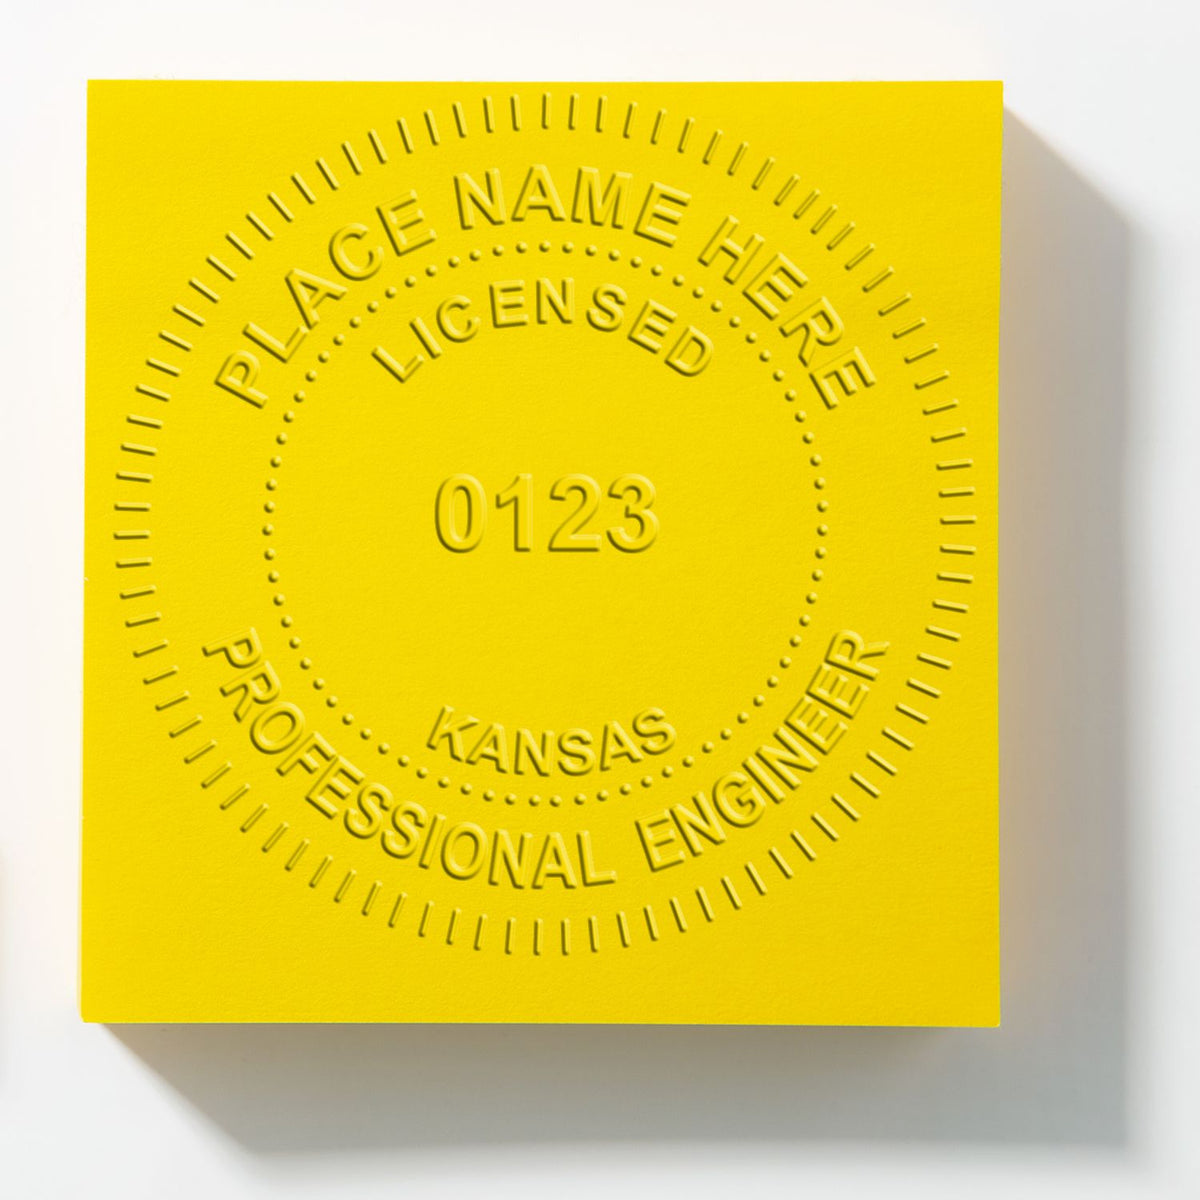 This paper is stamped with a sample imprint of the Soft Kansas Professional Engineer Seal, signifying its quality and reliability.